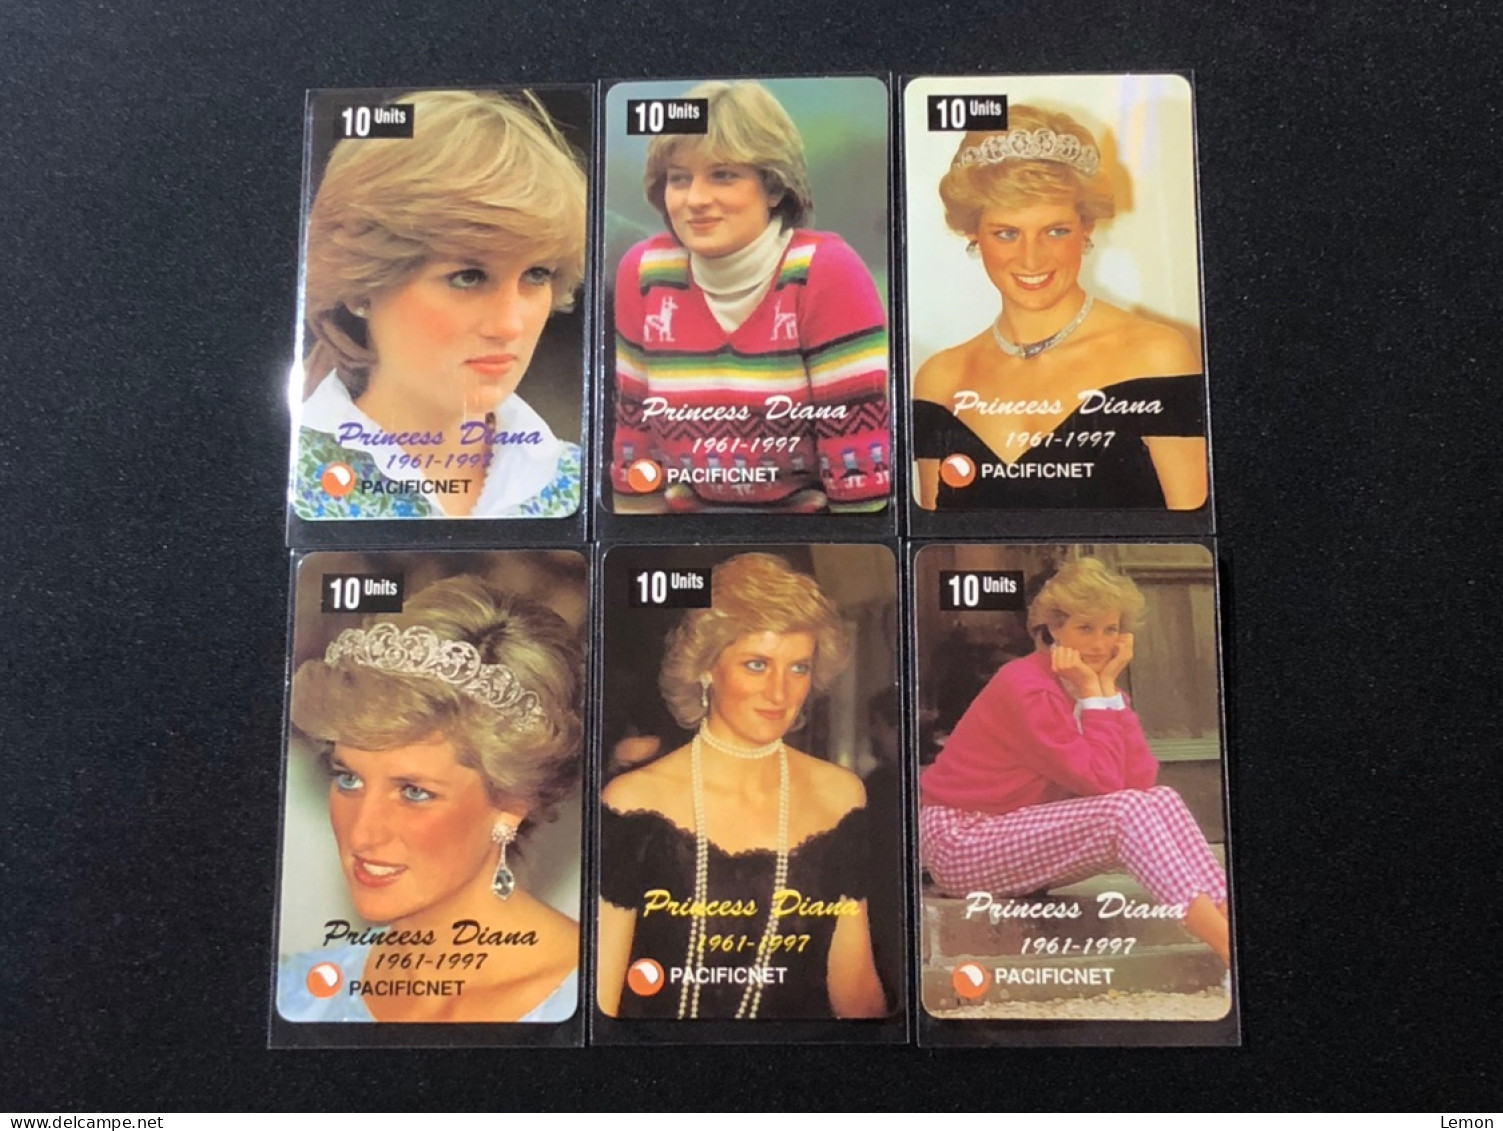 Mint Hong Kong PACIFICNET Phonecard, Princess Diana Limited Edition, Set of 18 Mint Cards, 2000 EX Only